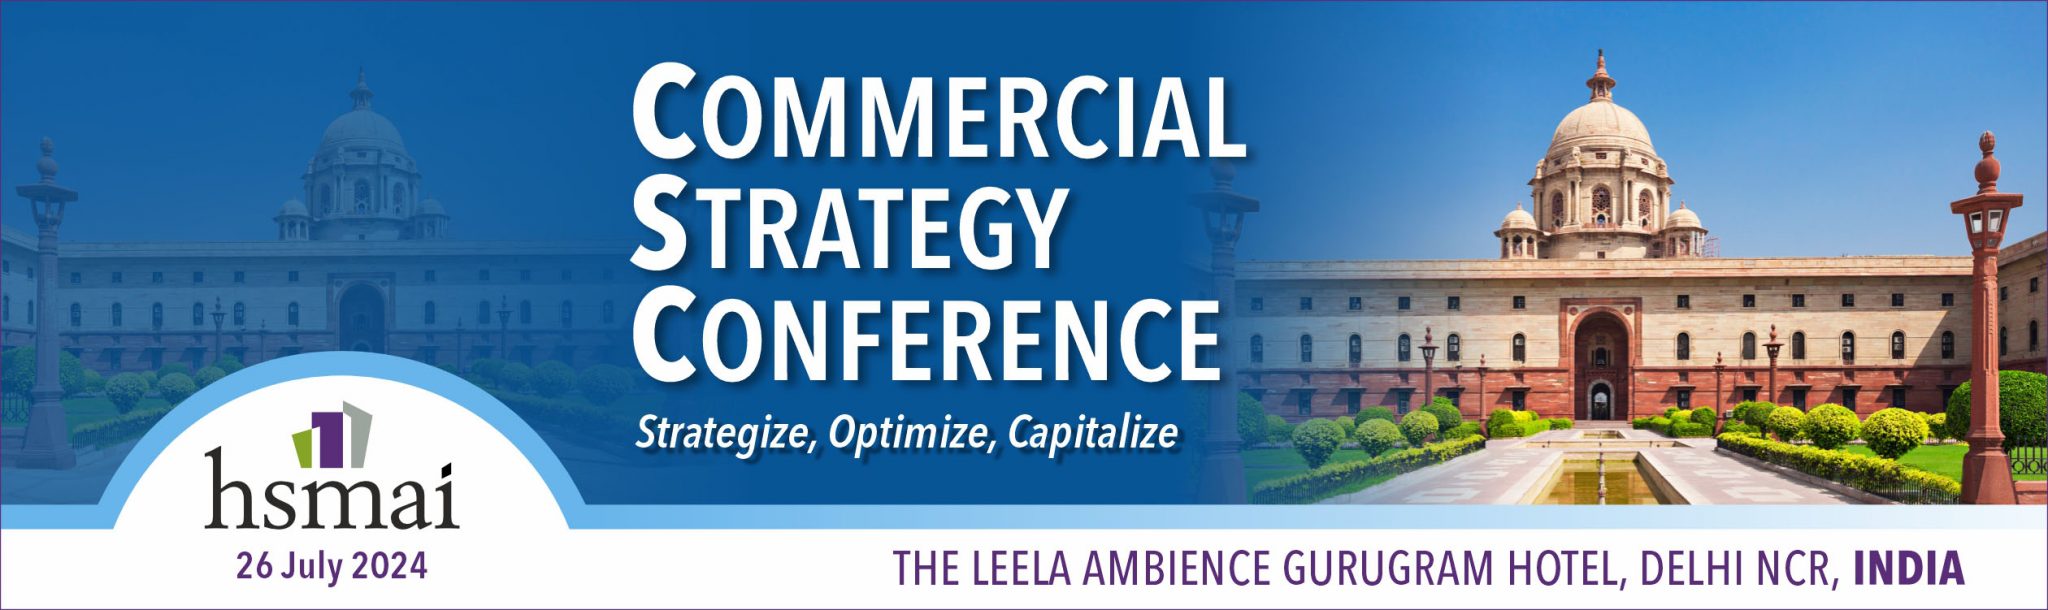 HSMAI Commercial Strategy Conference – India: Speakers